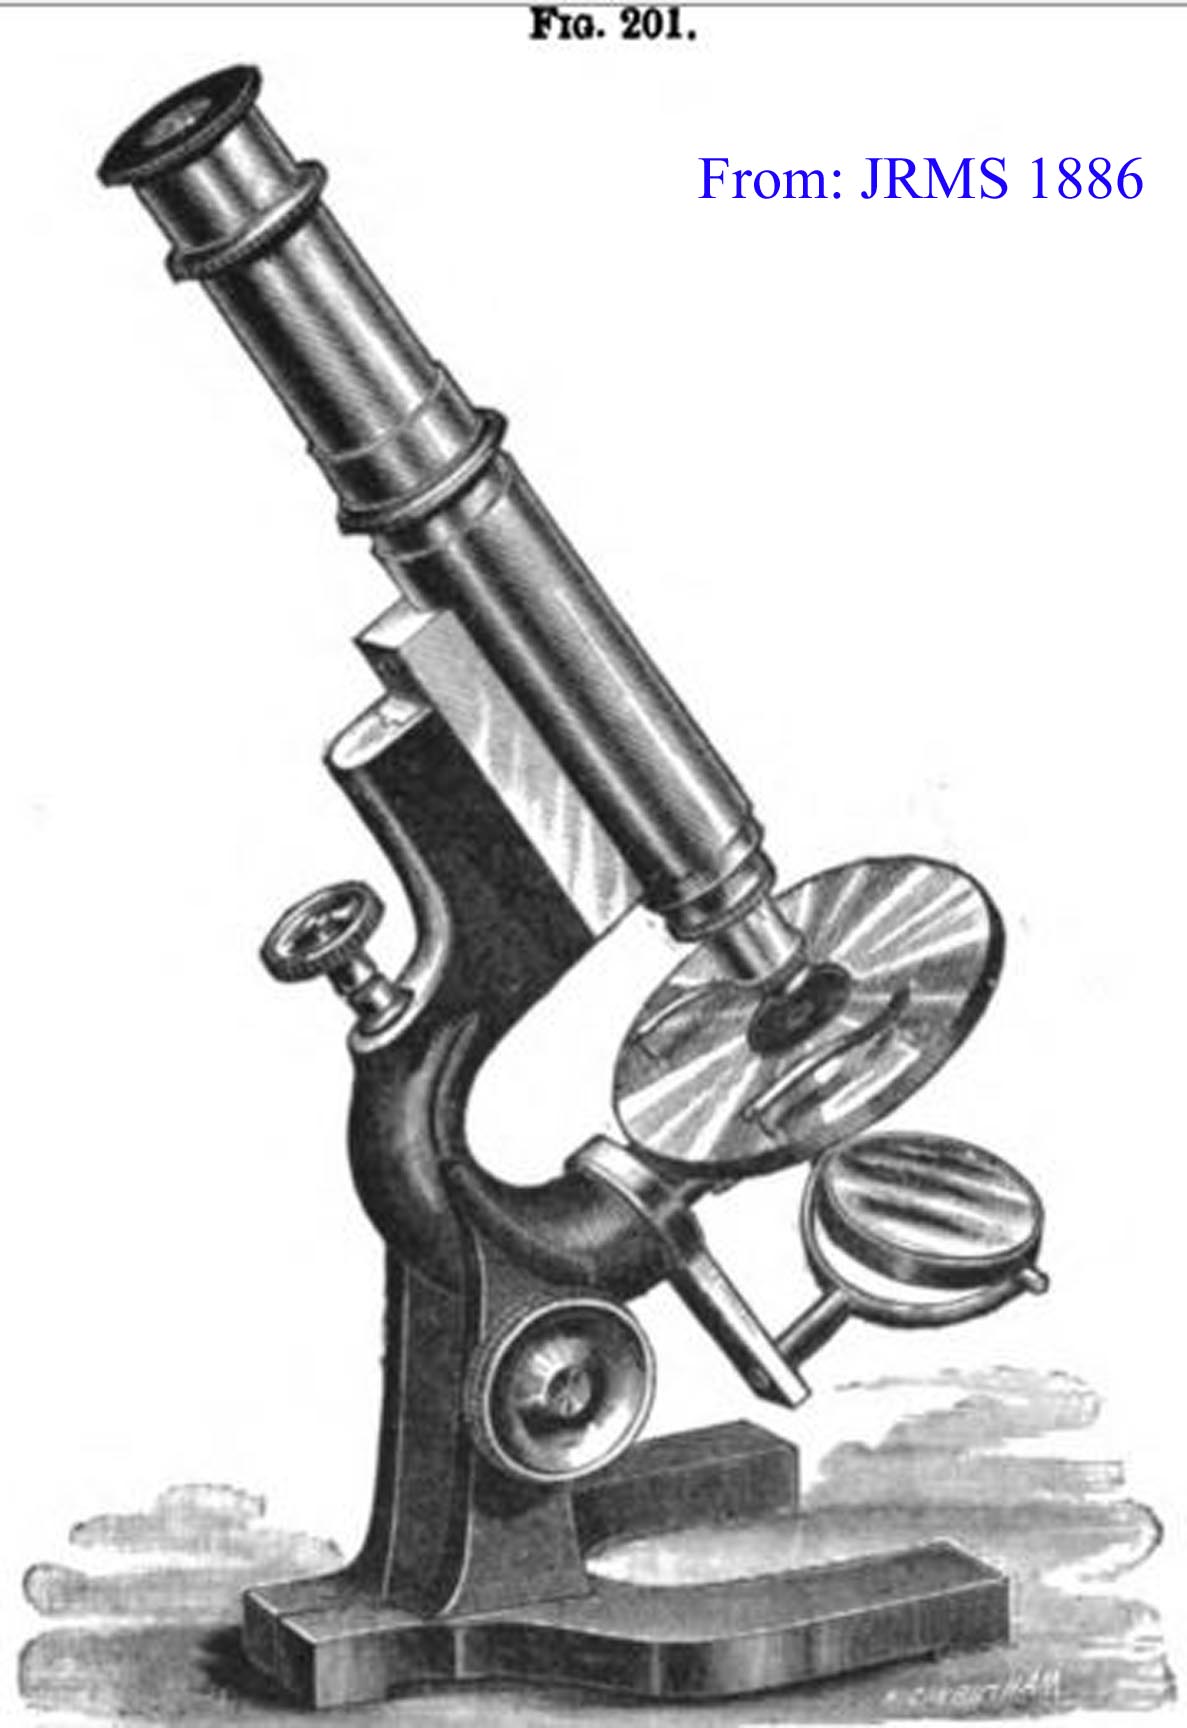 B and L Wale microscope JRMS 1886